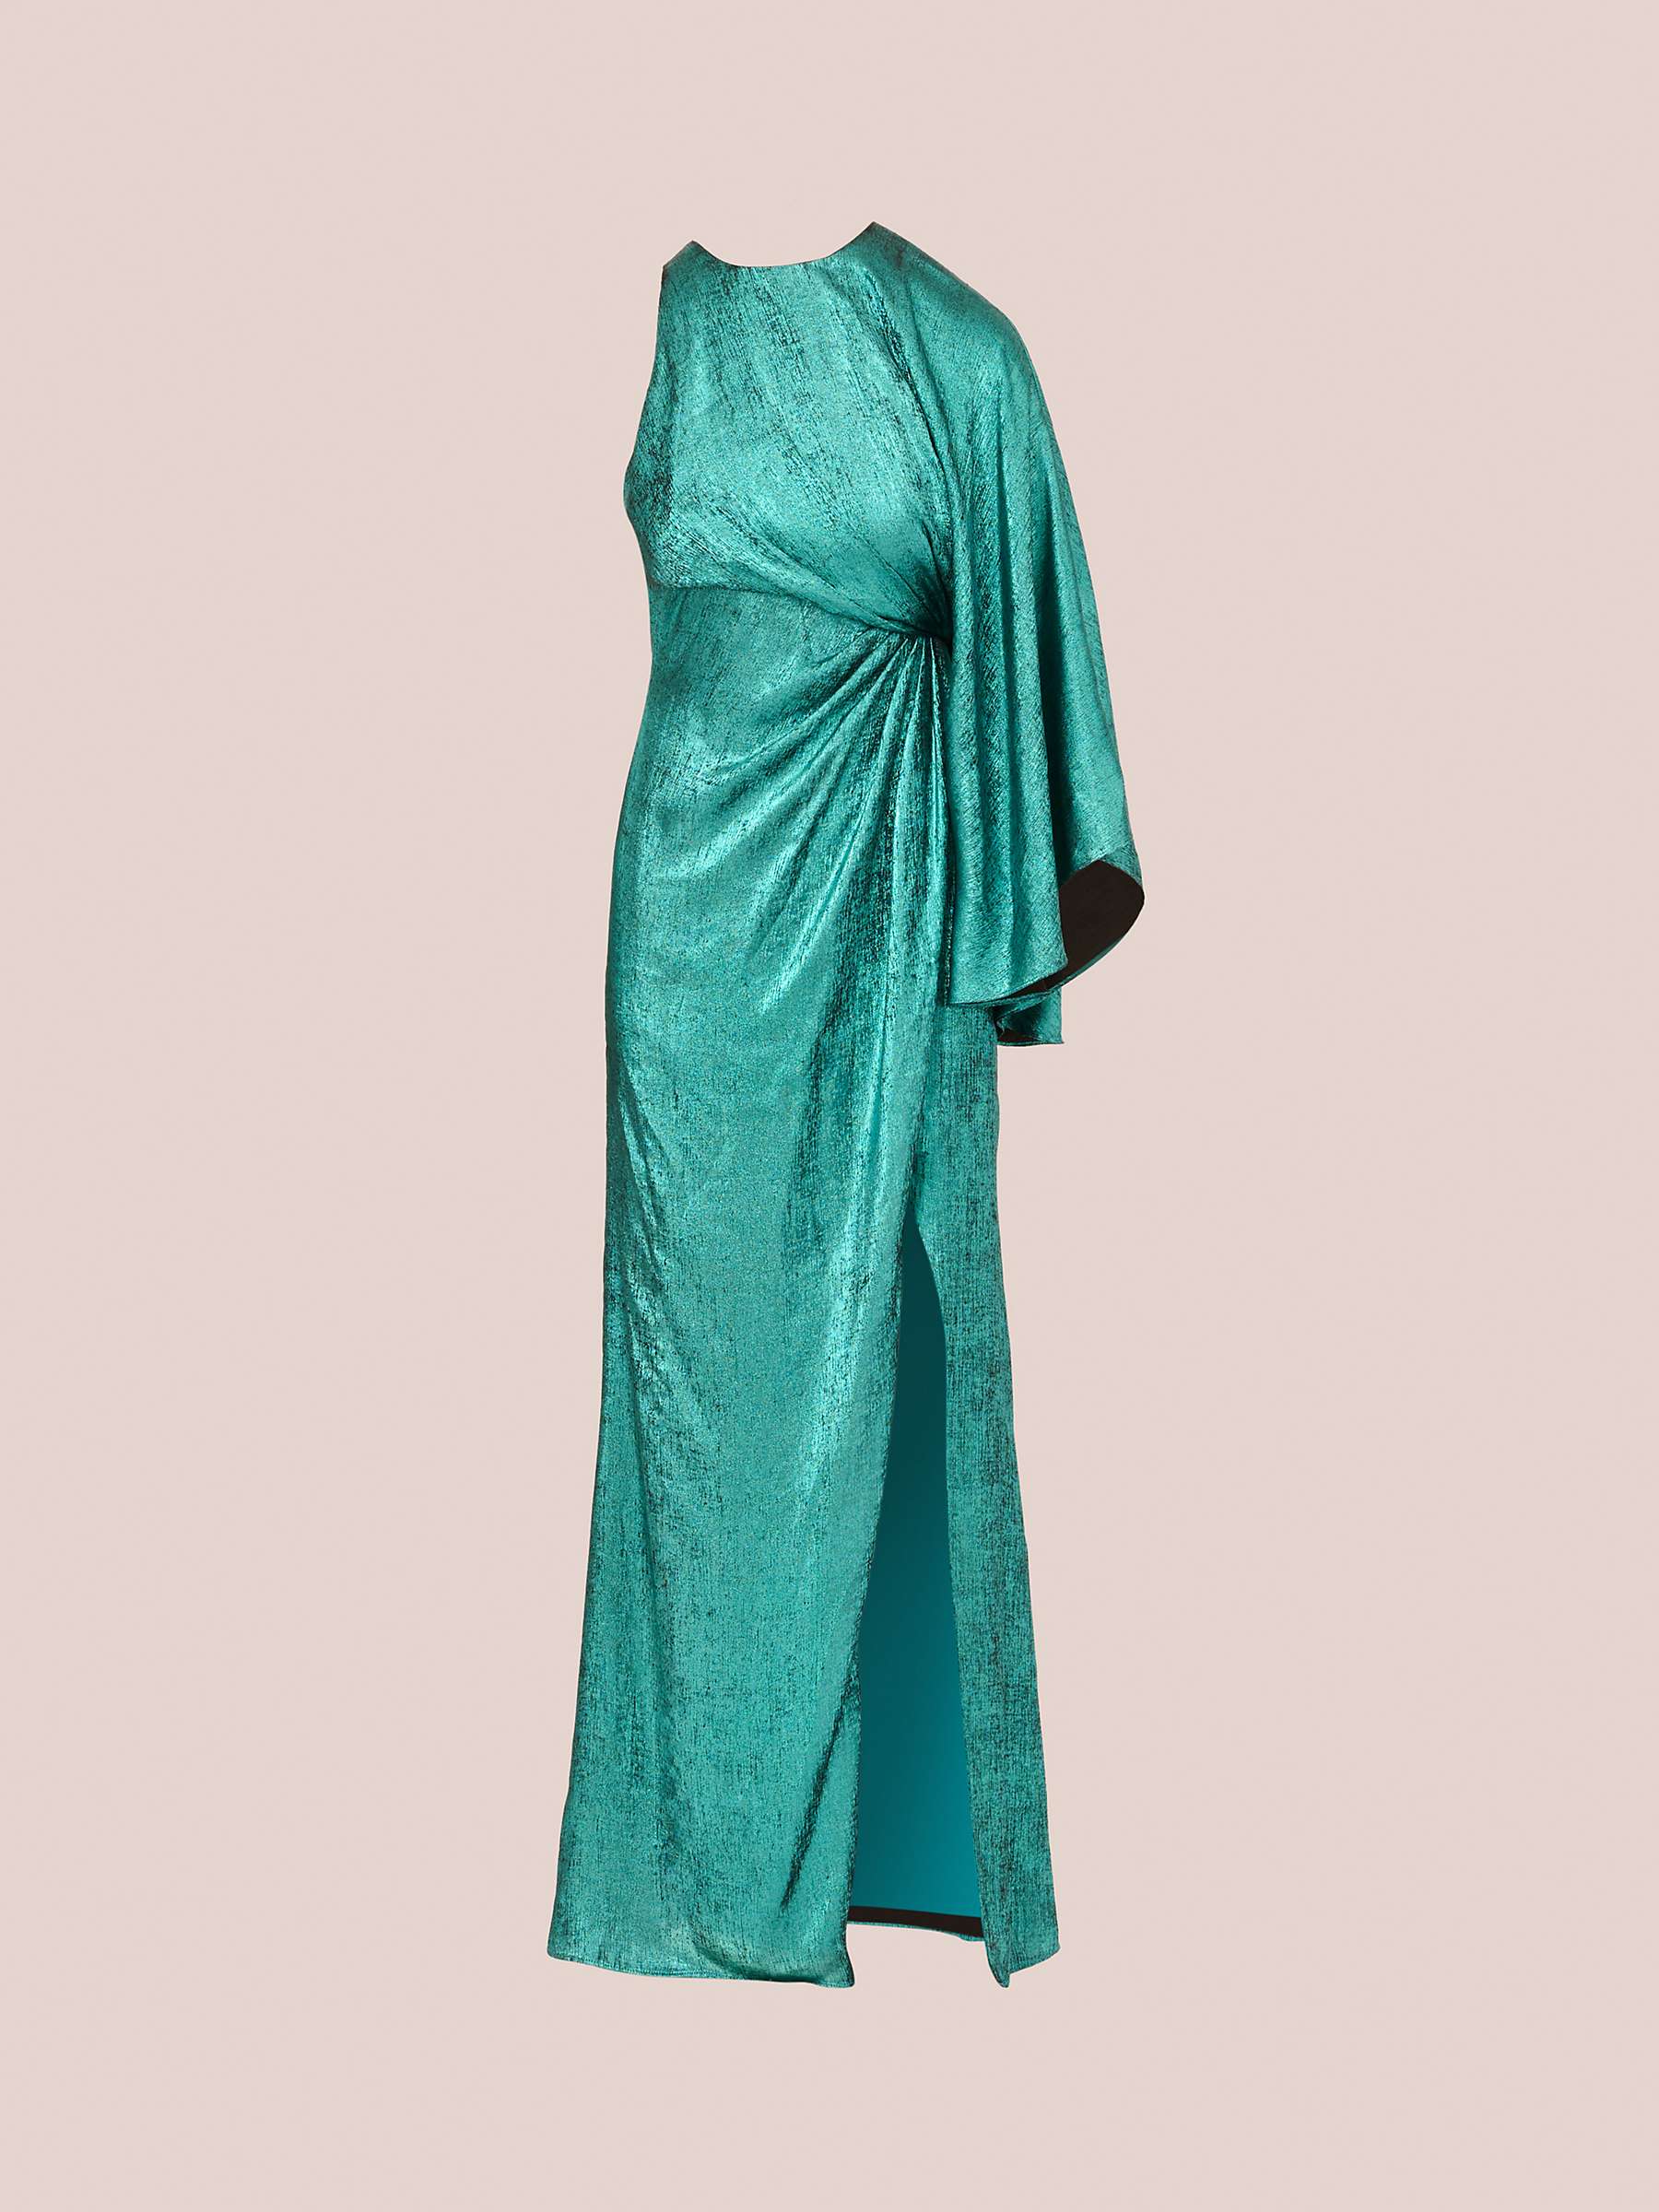 Buy Adian Mattox by Adrianna Papell Foil Chiffon Gown, Jade Online at johnlewis.com